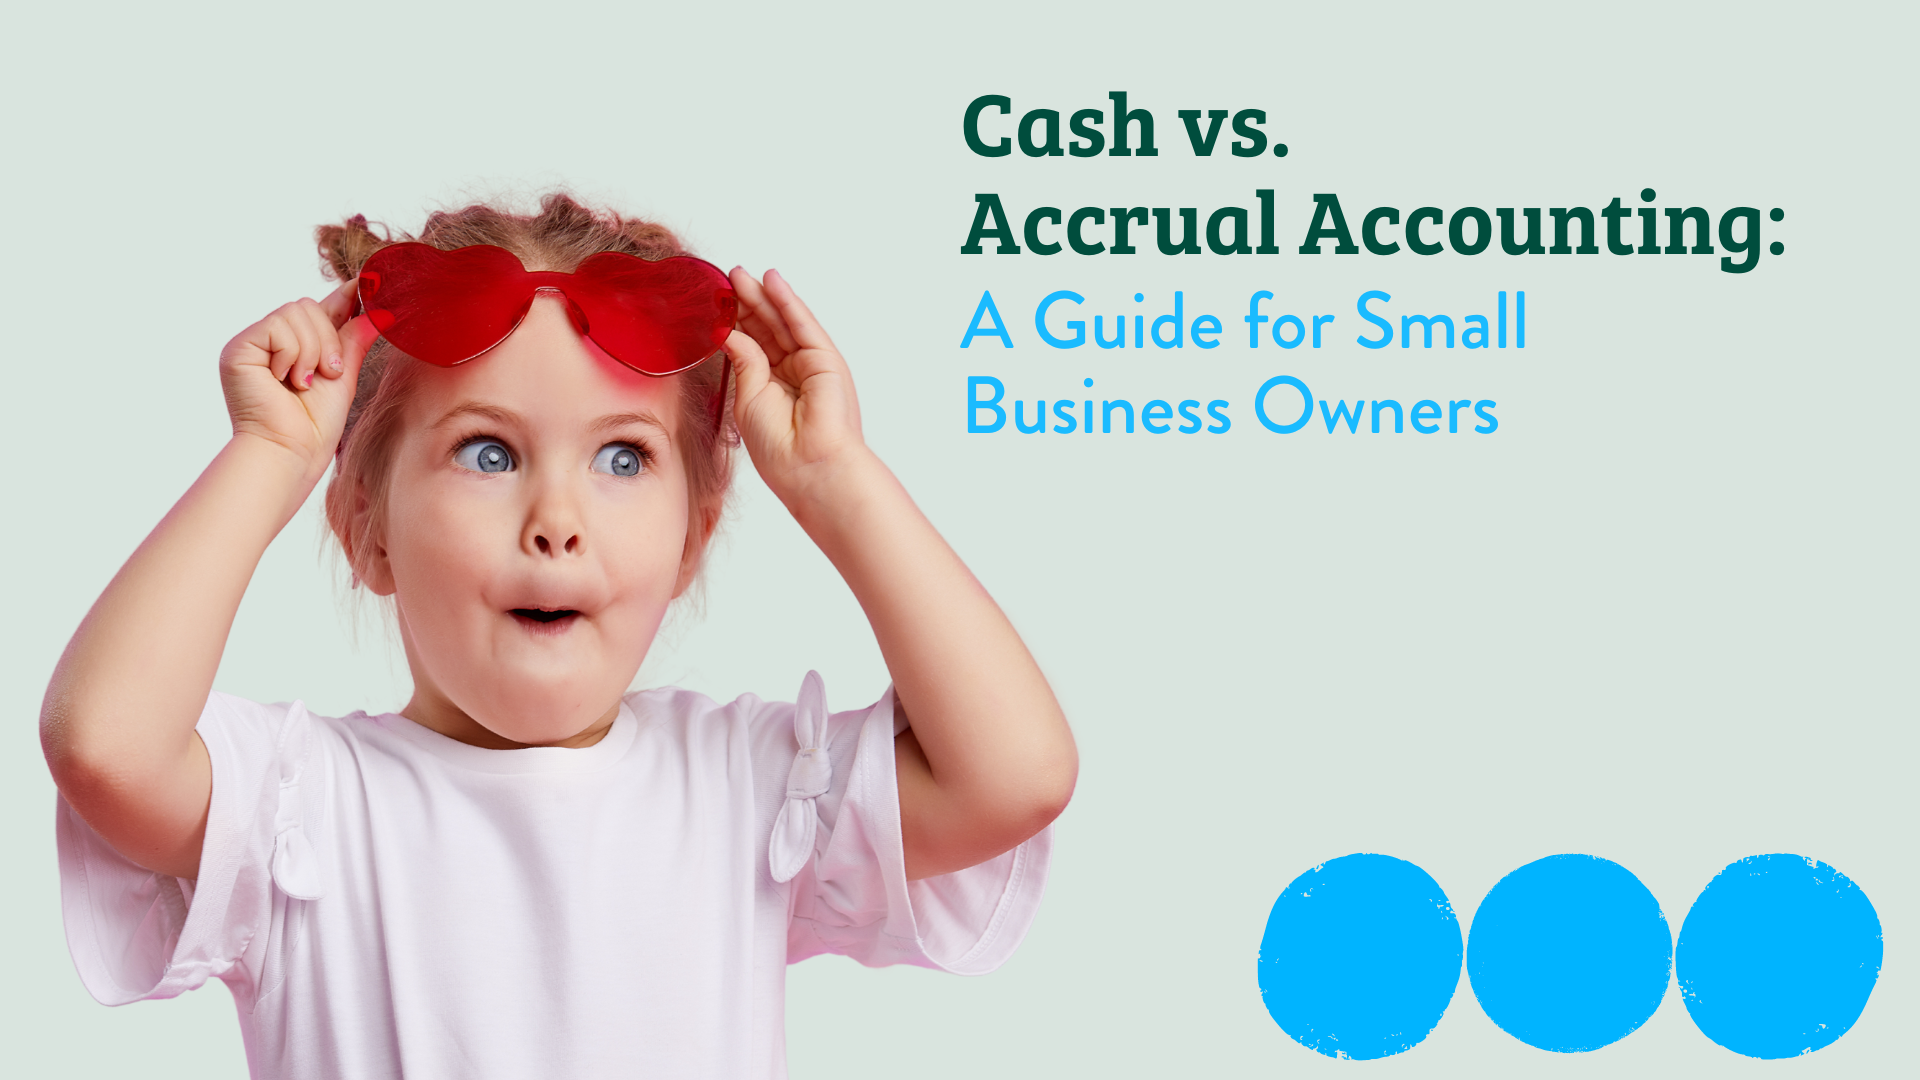 Cash vs. Accrual Accounting: A Guide for Small Business Owners